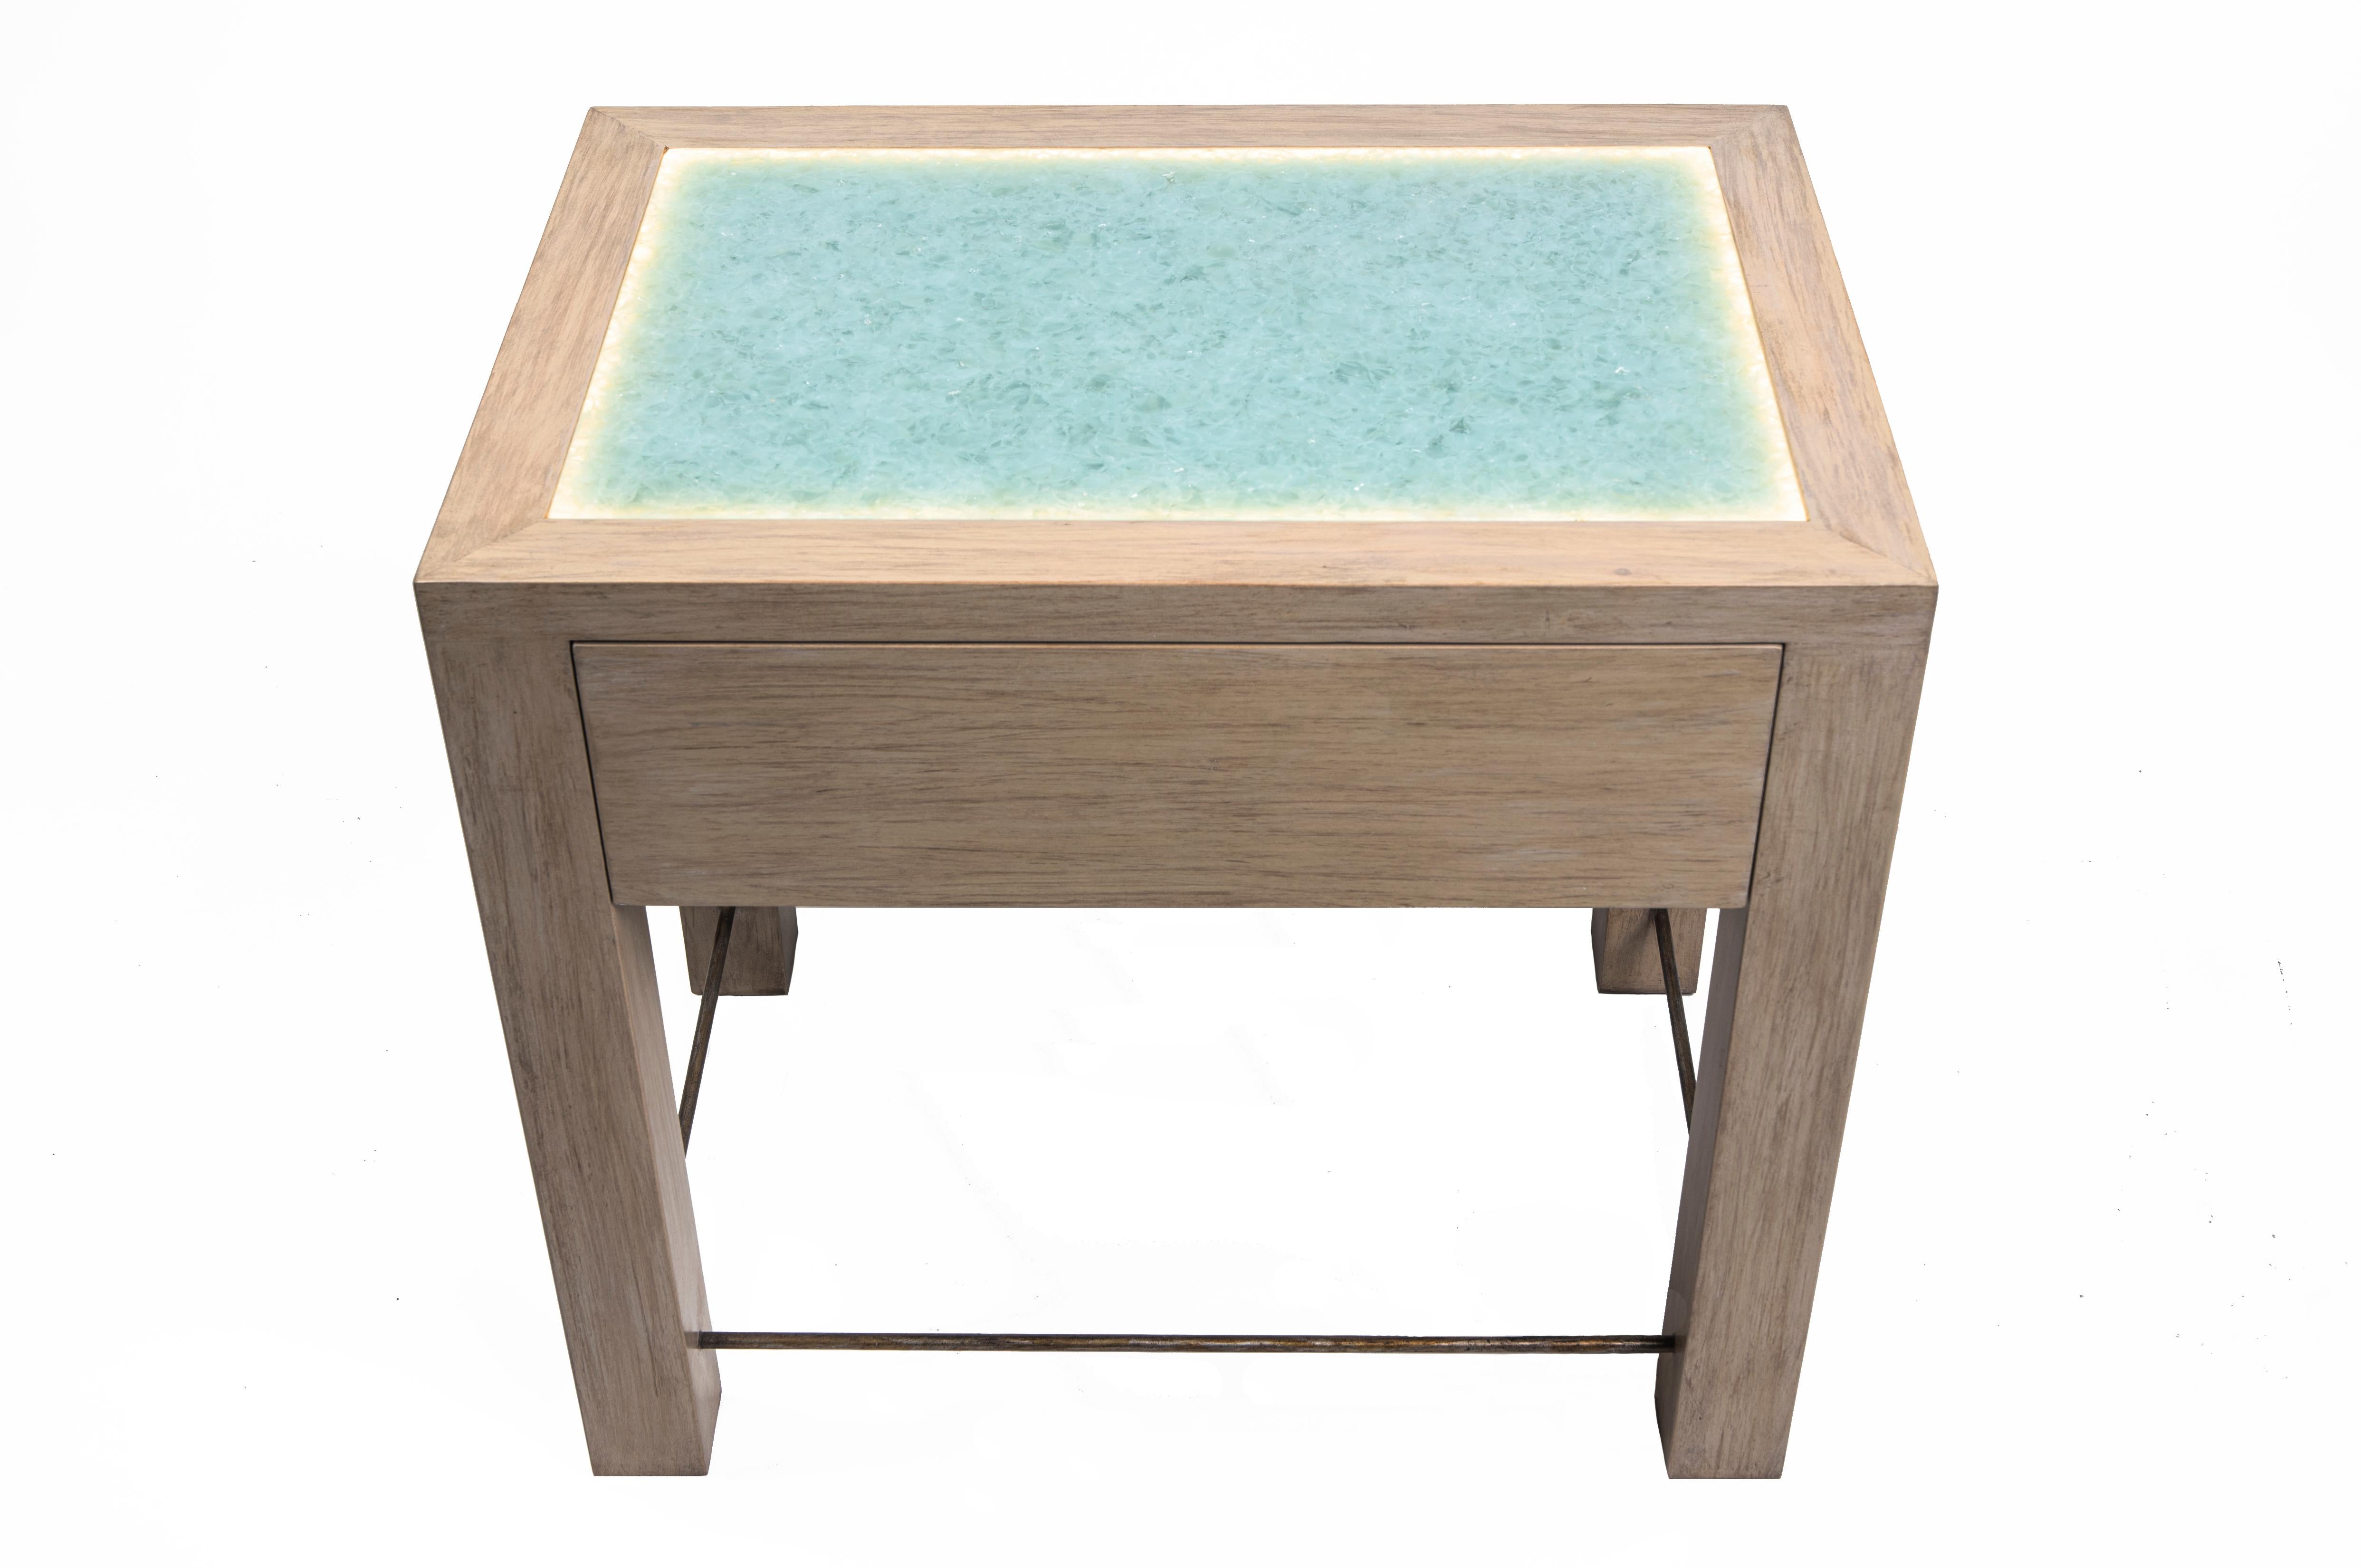 Eliminate the need for bedside lamps and add a warm glow to any bedroom with the innovative Misty Nightstand. Custom-crafted with built-in LED lighting and touch close drawers, this piece is free of hardware to better showcase its beautiful recycled